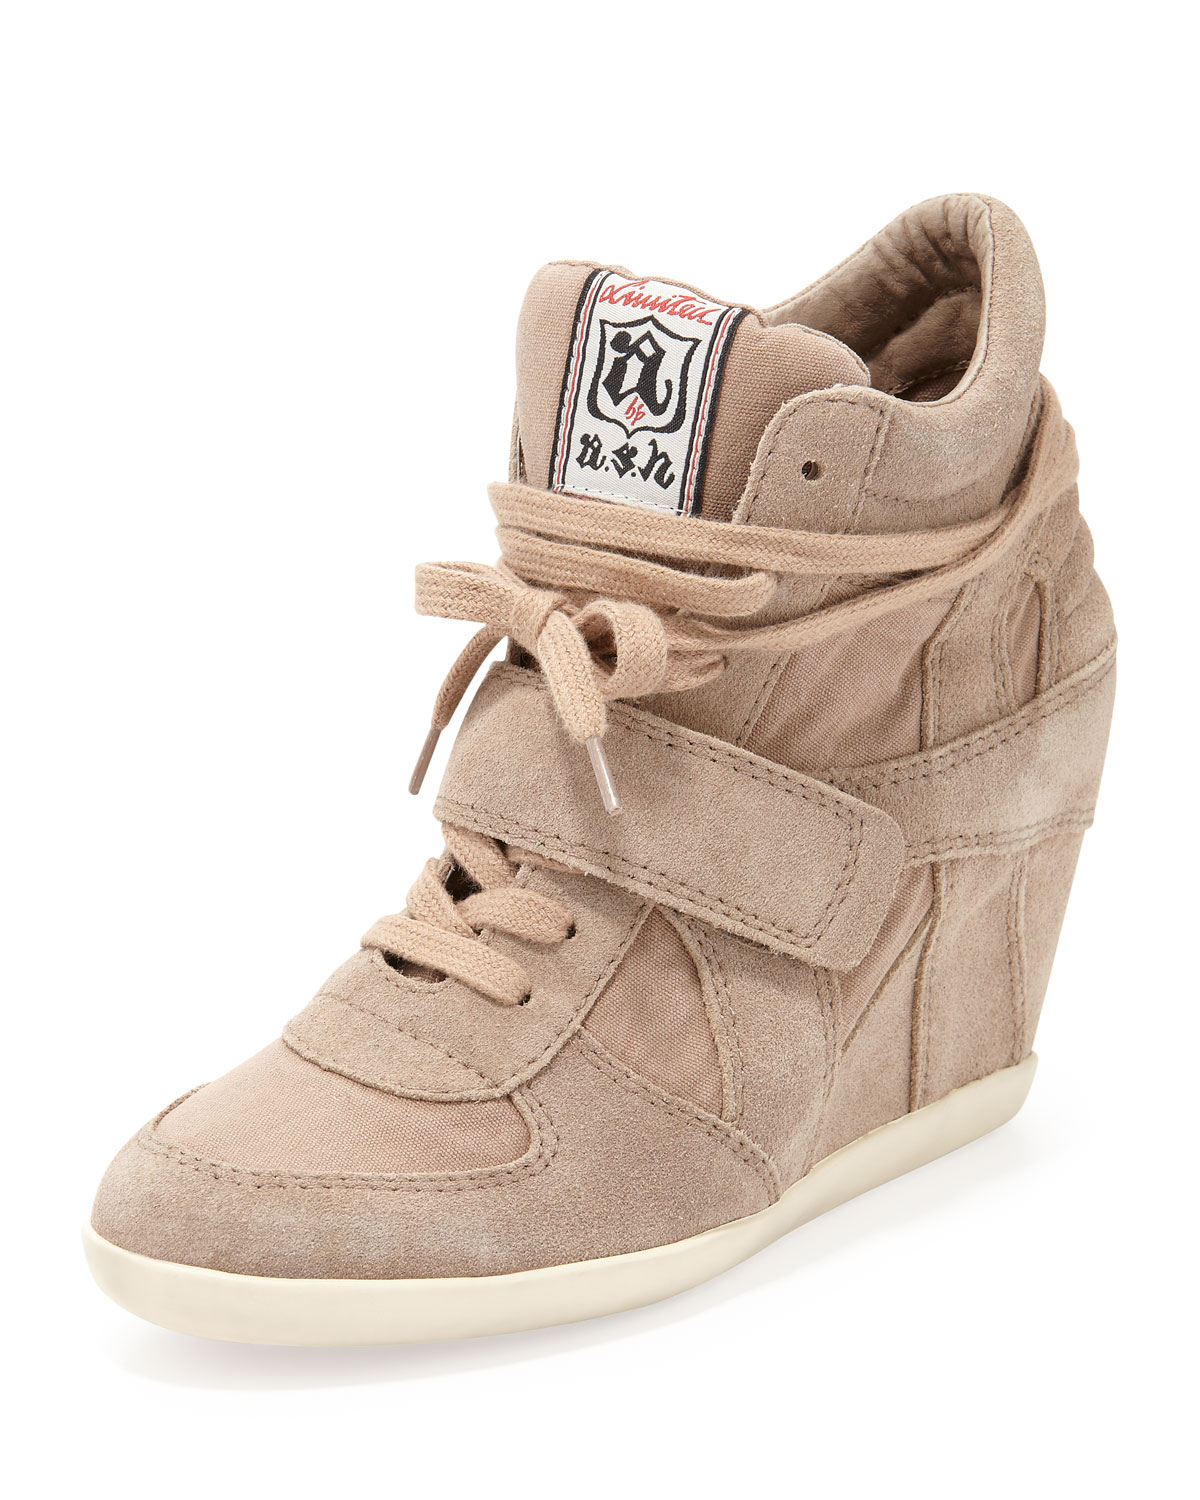 Ash Bowie Suede and Canvas Wedge Sneaker Chamois in Natural | Lyst